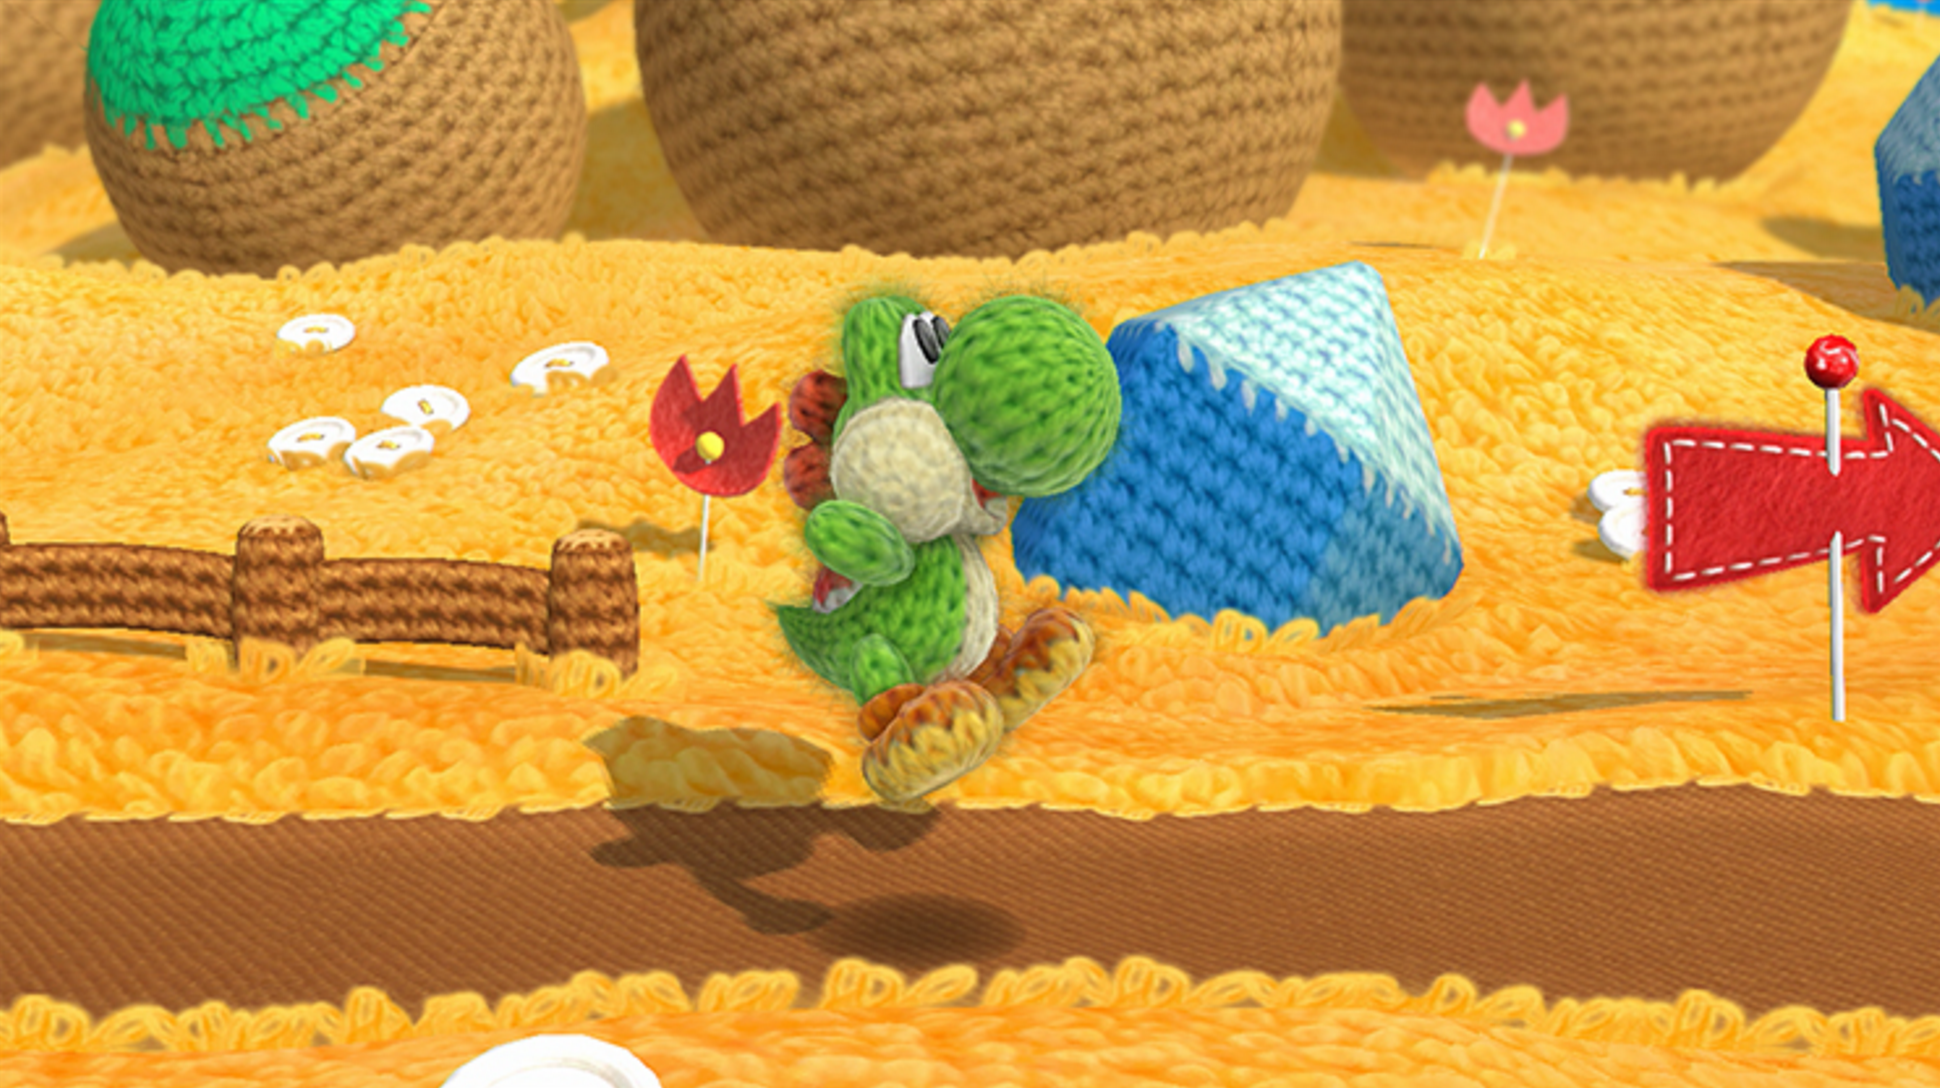 Yoshi's Wooly World saw the iconic dinosaur recreated in yarn, and that handcrafted aesthetic started in Super Mario World 2.